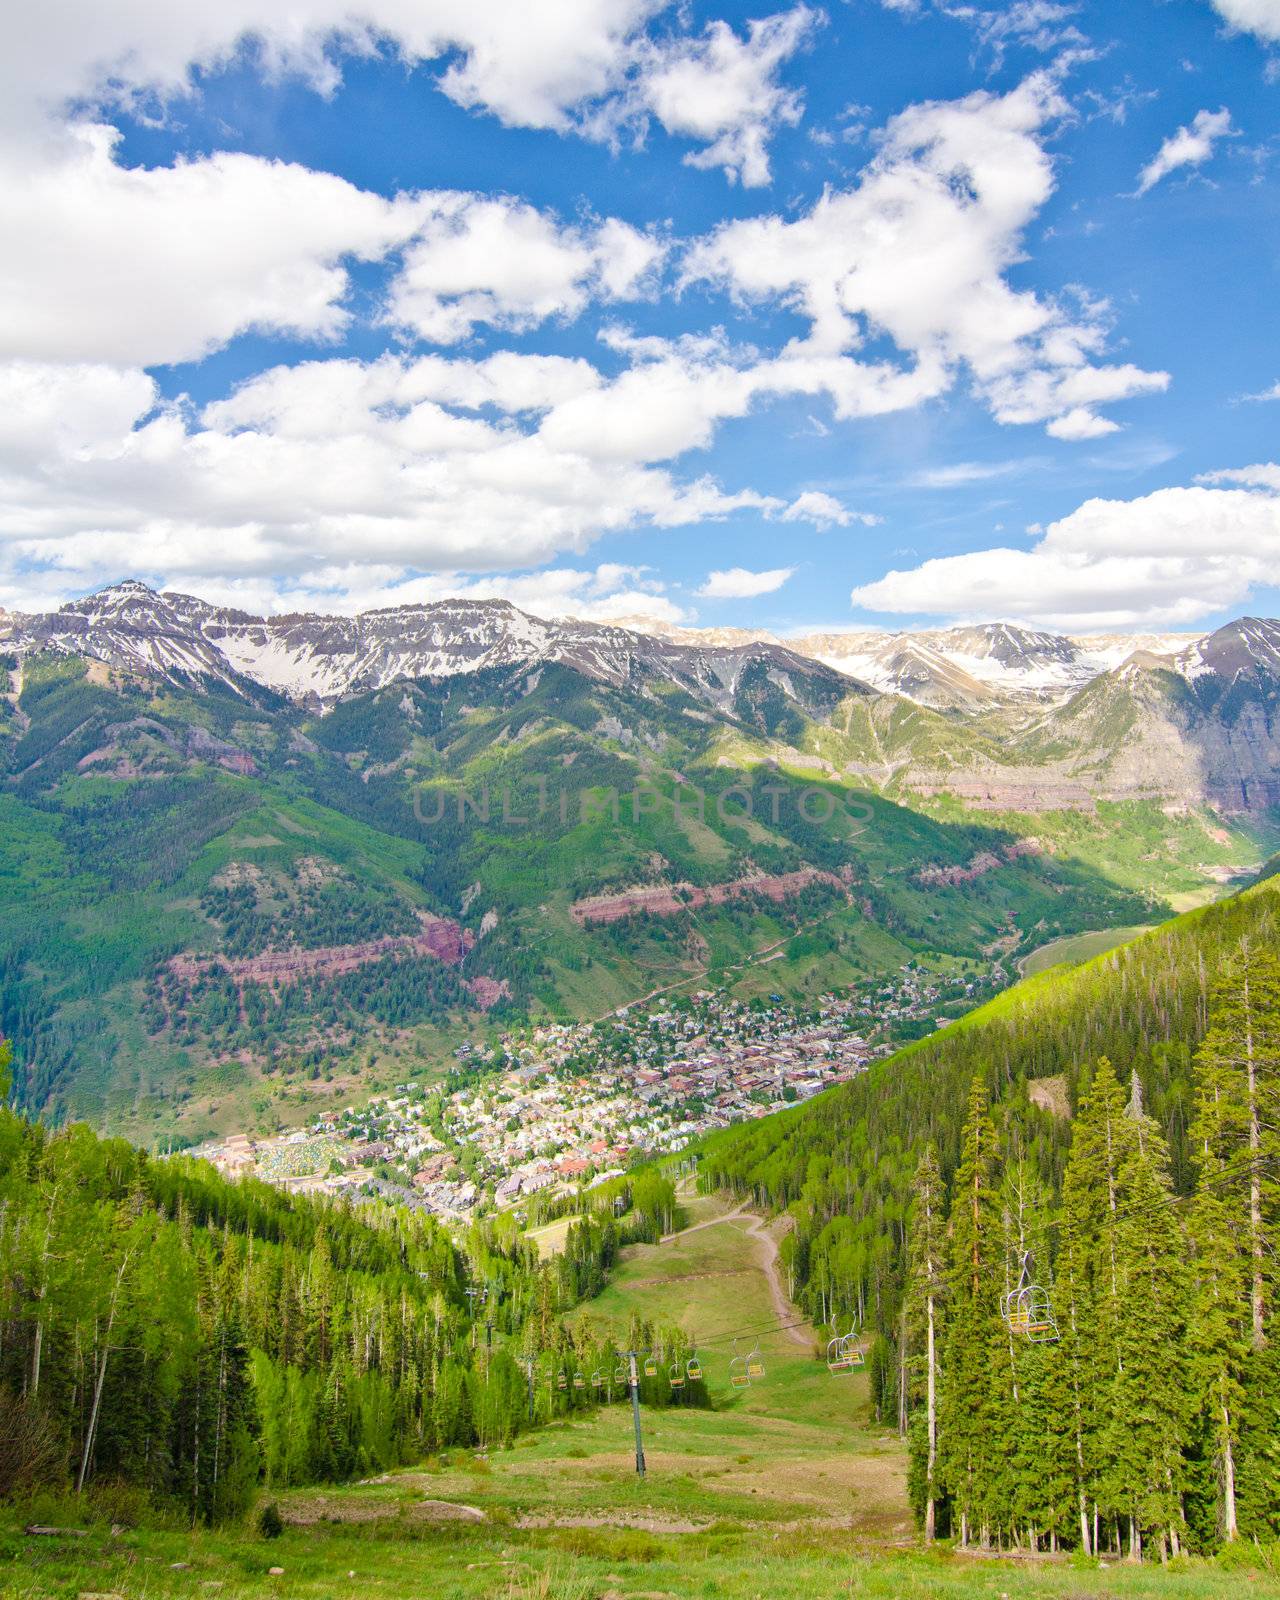 Telluride, Colorado, the Most Beautiful City in the USA